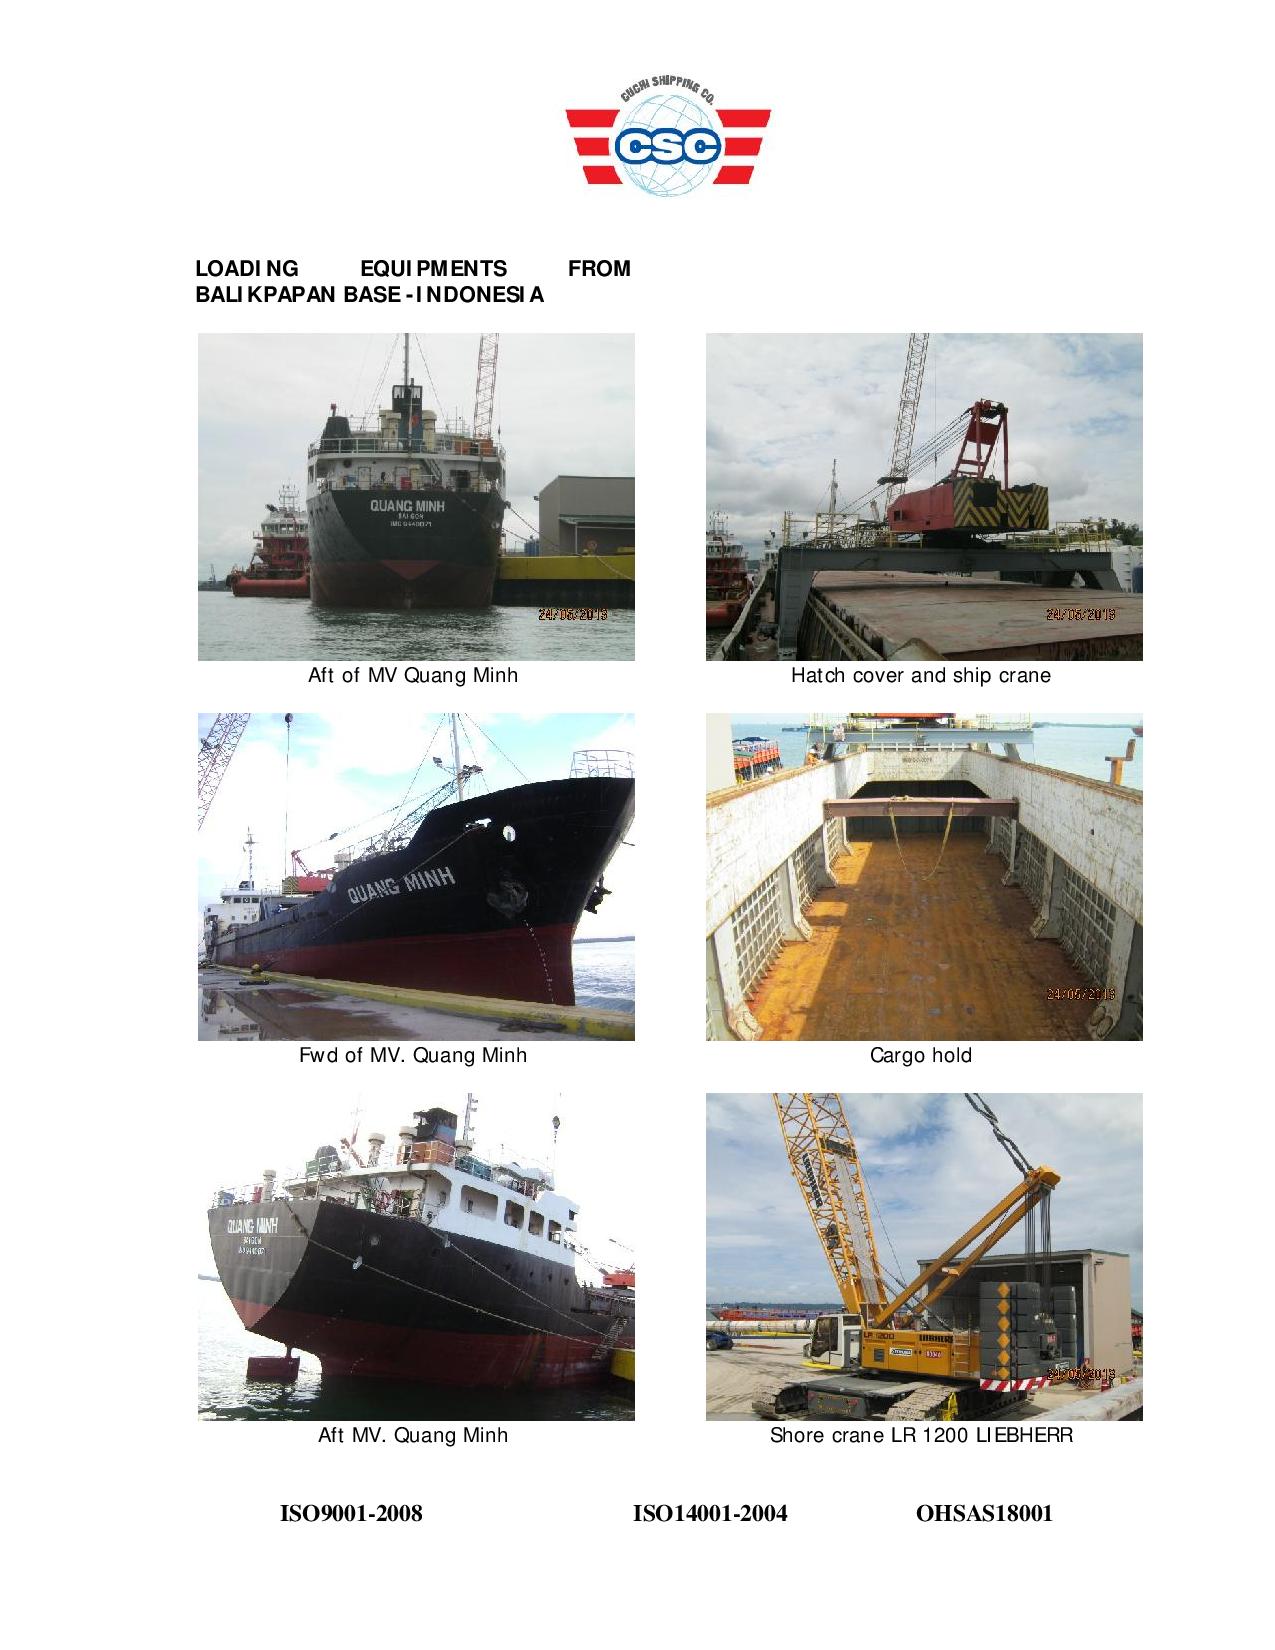 2013 ORIGIN ENERGY EXPLORATORY DRILLING PROJECT- MOVING EQUIPMENT FROM BALIK PABAN TO PTSC BASE-page-001.jpg